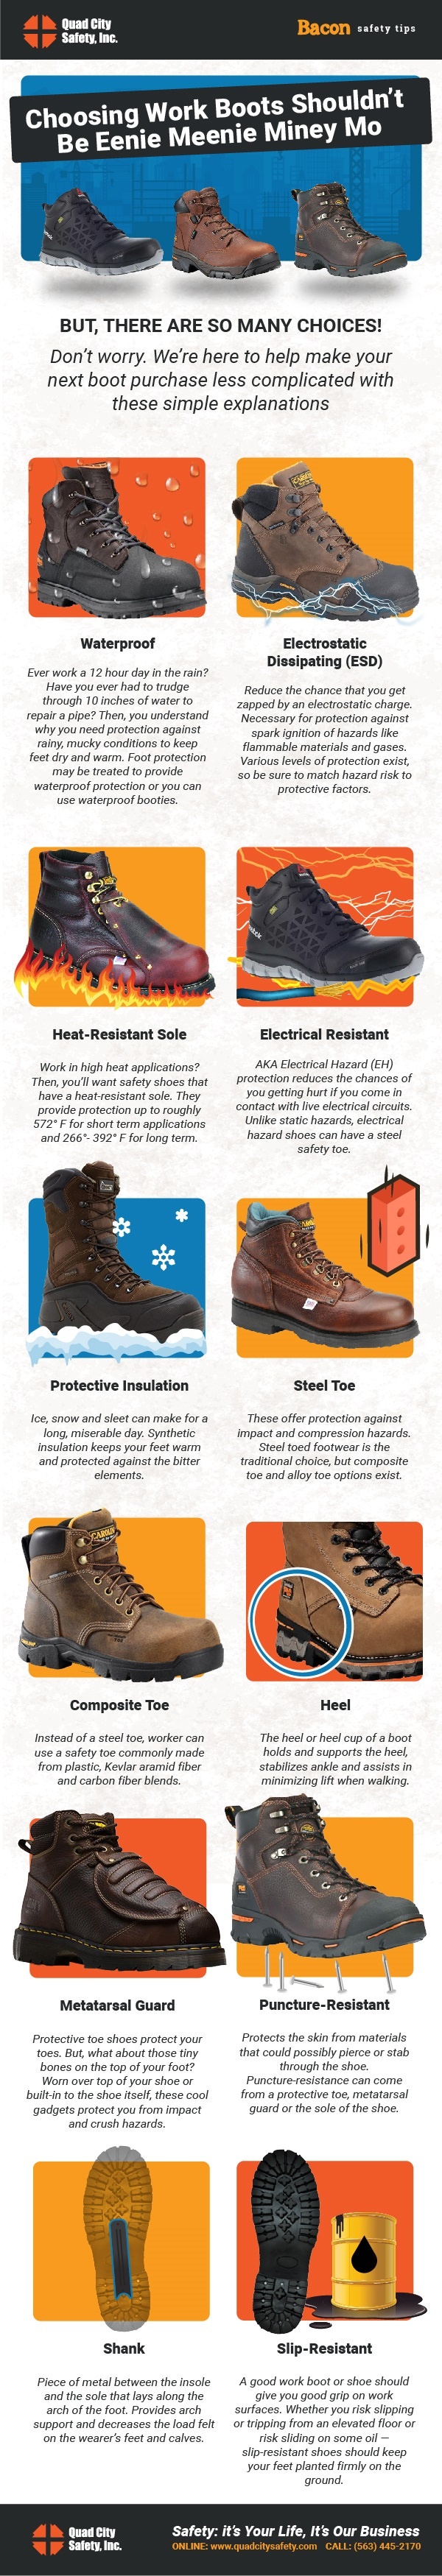 Choosing Work Boots Shouldn’t Be Eenie Meenie Miney Mo   But, there are so many choices! Don’t worry. We’re here to help make your next boot purchase less complicated with these simple explanations.    Electrical Resistant AKA Electrical Hazard (EH) protection reduces the chances of you getting hurt if you come in contact with live electrical circuits. Unlike static hazards, electrical hazard shoes can have a steel safety toe.    Electrostatic Dissipating (ESD) Reduce the chance that you get zapped by an electrostatic charge. Necessary for protection against spark ignition of hazards like flammable materials and gases. Various levels of protection exist, so be sure to match hazard risk to protective factors.   Heat-Resistant Sole Work in high heat applications? Then, you’ll want safety shoes that have a heat-resistant sole. They provide protection up to roughly 572° F for short term applications and 266°- 392° F for long term.   Waterproof Ever work a 12 hour day in the rain? Have you ever had to trudge through 10 inches of water to repair a pipe? Then, you understand why you need protection against rainy, mucky conditions to keep feet dry and warm. Foot protection may be treated to provide waterproof protection or you can use waterproof booties.    Protective Insulation Ice, snow and sleet can make for a long, miserable day. Synthetic insulation keeps your feet warm and protected against the bitter elements.   Steel Toe These offer protection against impact and compression hazards. Steel toed footwear is the traditional choice, but composite toe and alloy toe options exist.  Composite Toe Instead of a steel toe, worker can use a safety toe commonly made from plastic, Kevlar aramid fiber and carbon fiber blends.   Metatarsal Guard Protective toe shoes protect your toes. But, what about those tiny bones on the top of your foot? Worn over top of your shoe or built-in to the shoe itself, these cool gadgets protect you from impact and crush hazards.    Shank Piece of metal between the insole and the sole that lays along the arch of the foot. Provides arch support and decreases the load felt on the wearer’s feet and calves.    Puncture-Resistant Protects the skin from materials that could possibly pierce or stab through the shoe. Puncture-resistance can come from a protective toe, metatarsal guard or the sole of the shoe.    Heel The heel or heel cup of a boot holds and supports the heel, stabilizes ankle and assists in minimizing lift when walking.      Slip-Resistant A good work boot or shoe should give you good grip on work surfaces. Whether you risk slipping or tripping from an elevated floor or risk sliding on some oil — slip-resistant shoes should keep your feet planted firmly on the ground. 